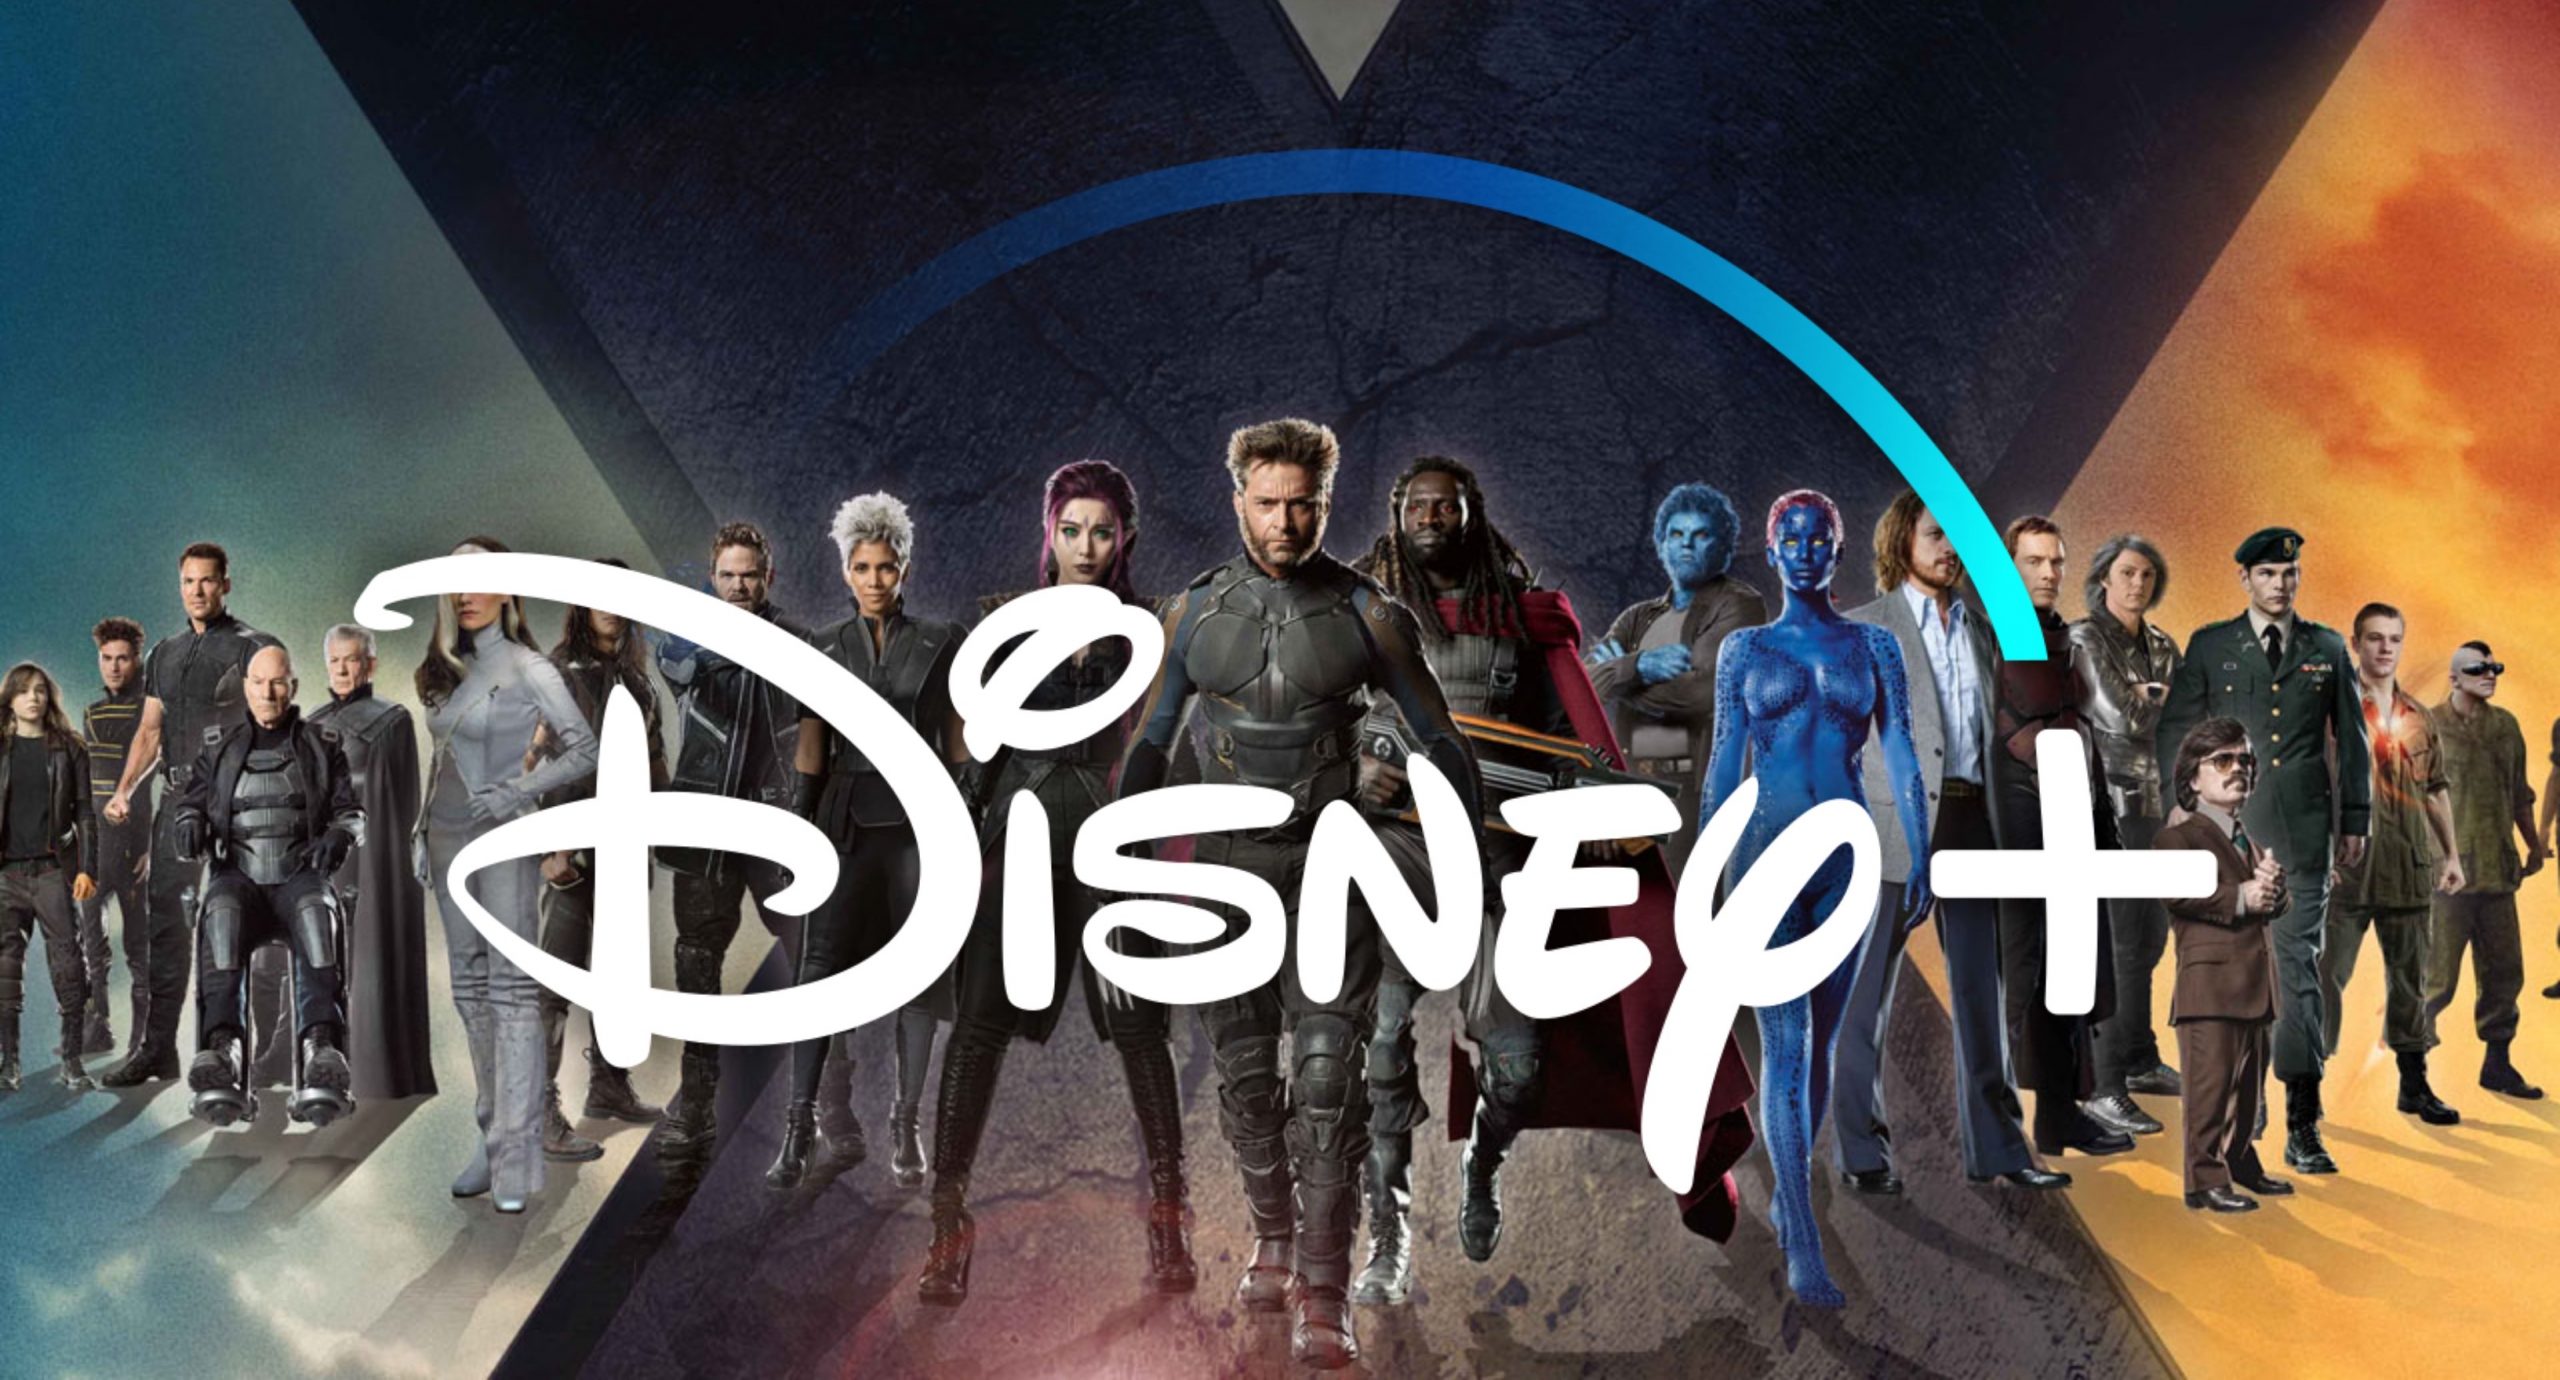 The ‘X-Men’ Films Will Debut of Disney+ This Summer